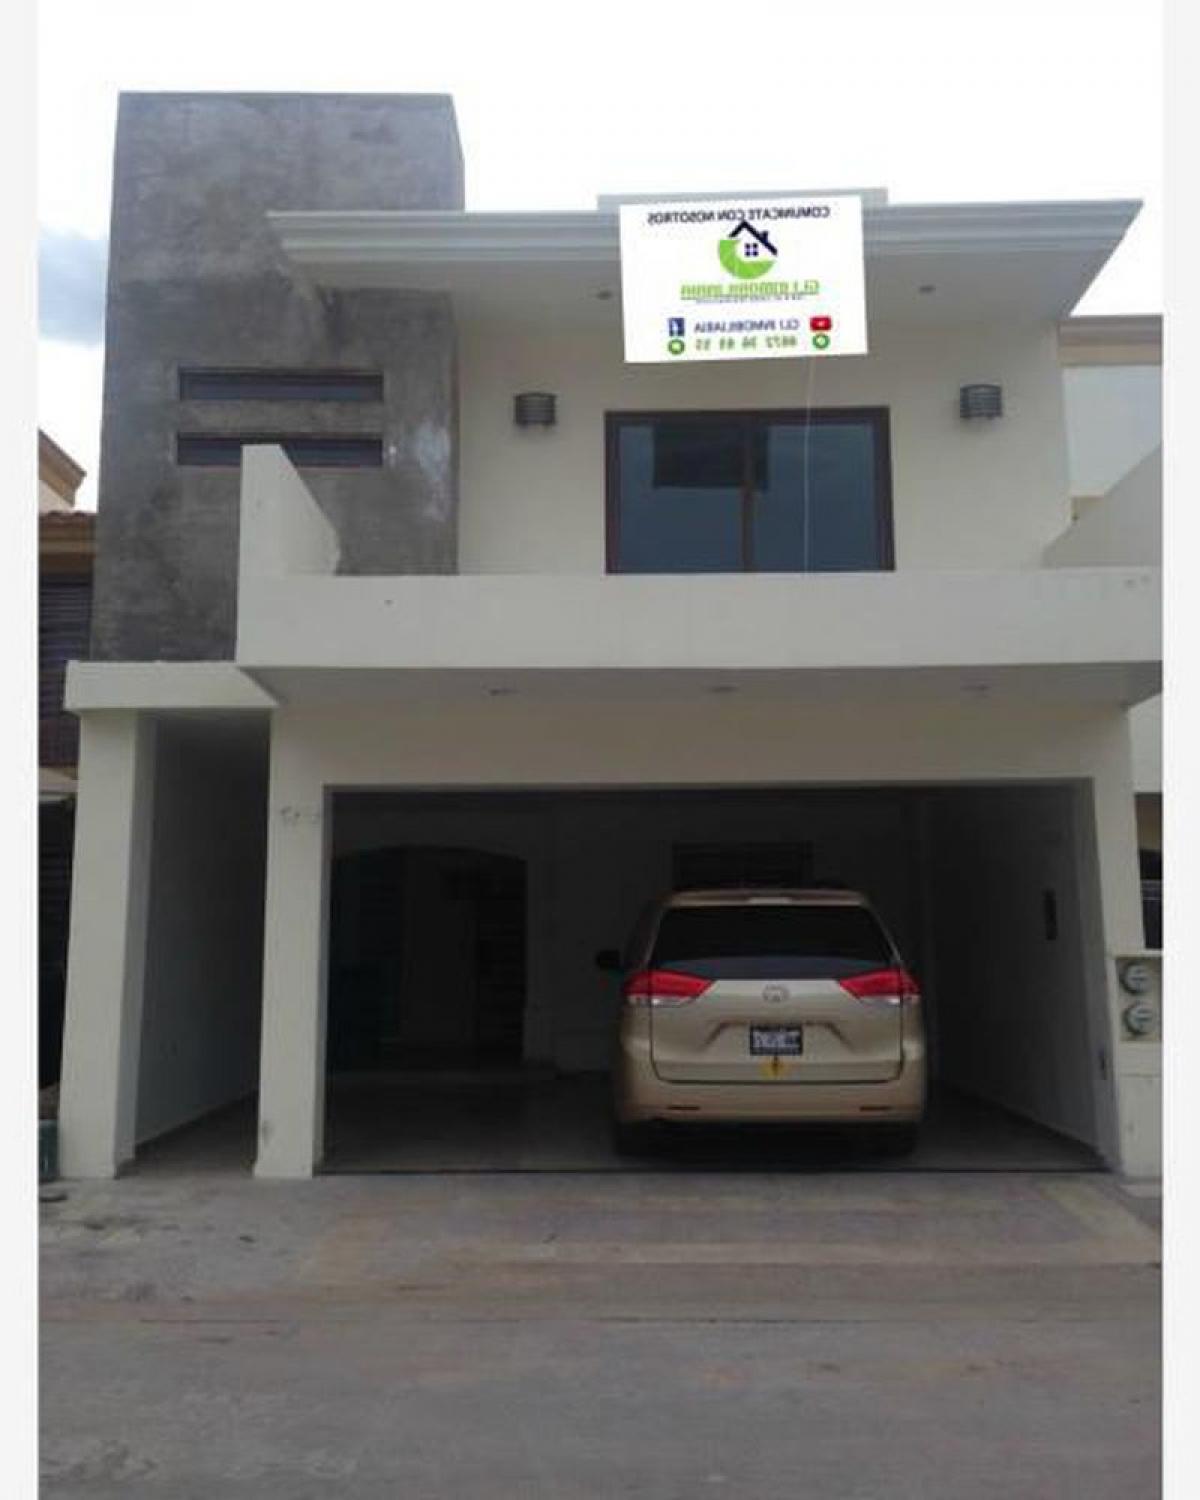 Picture of Home For Sale in Culiacan, Sinaloa, Mexico